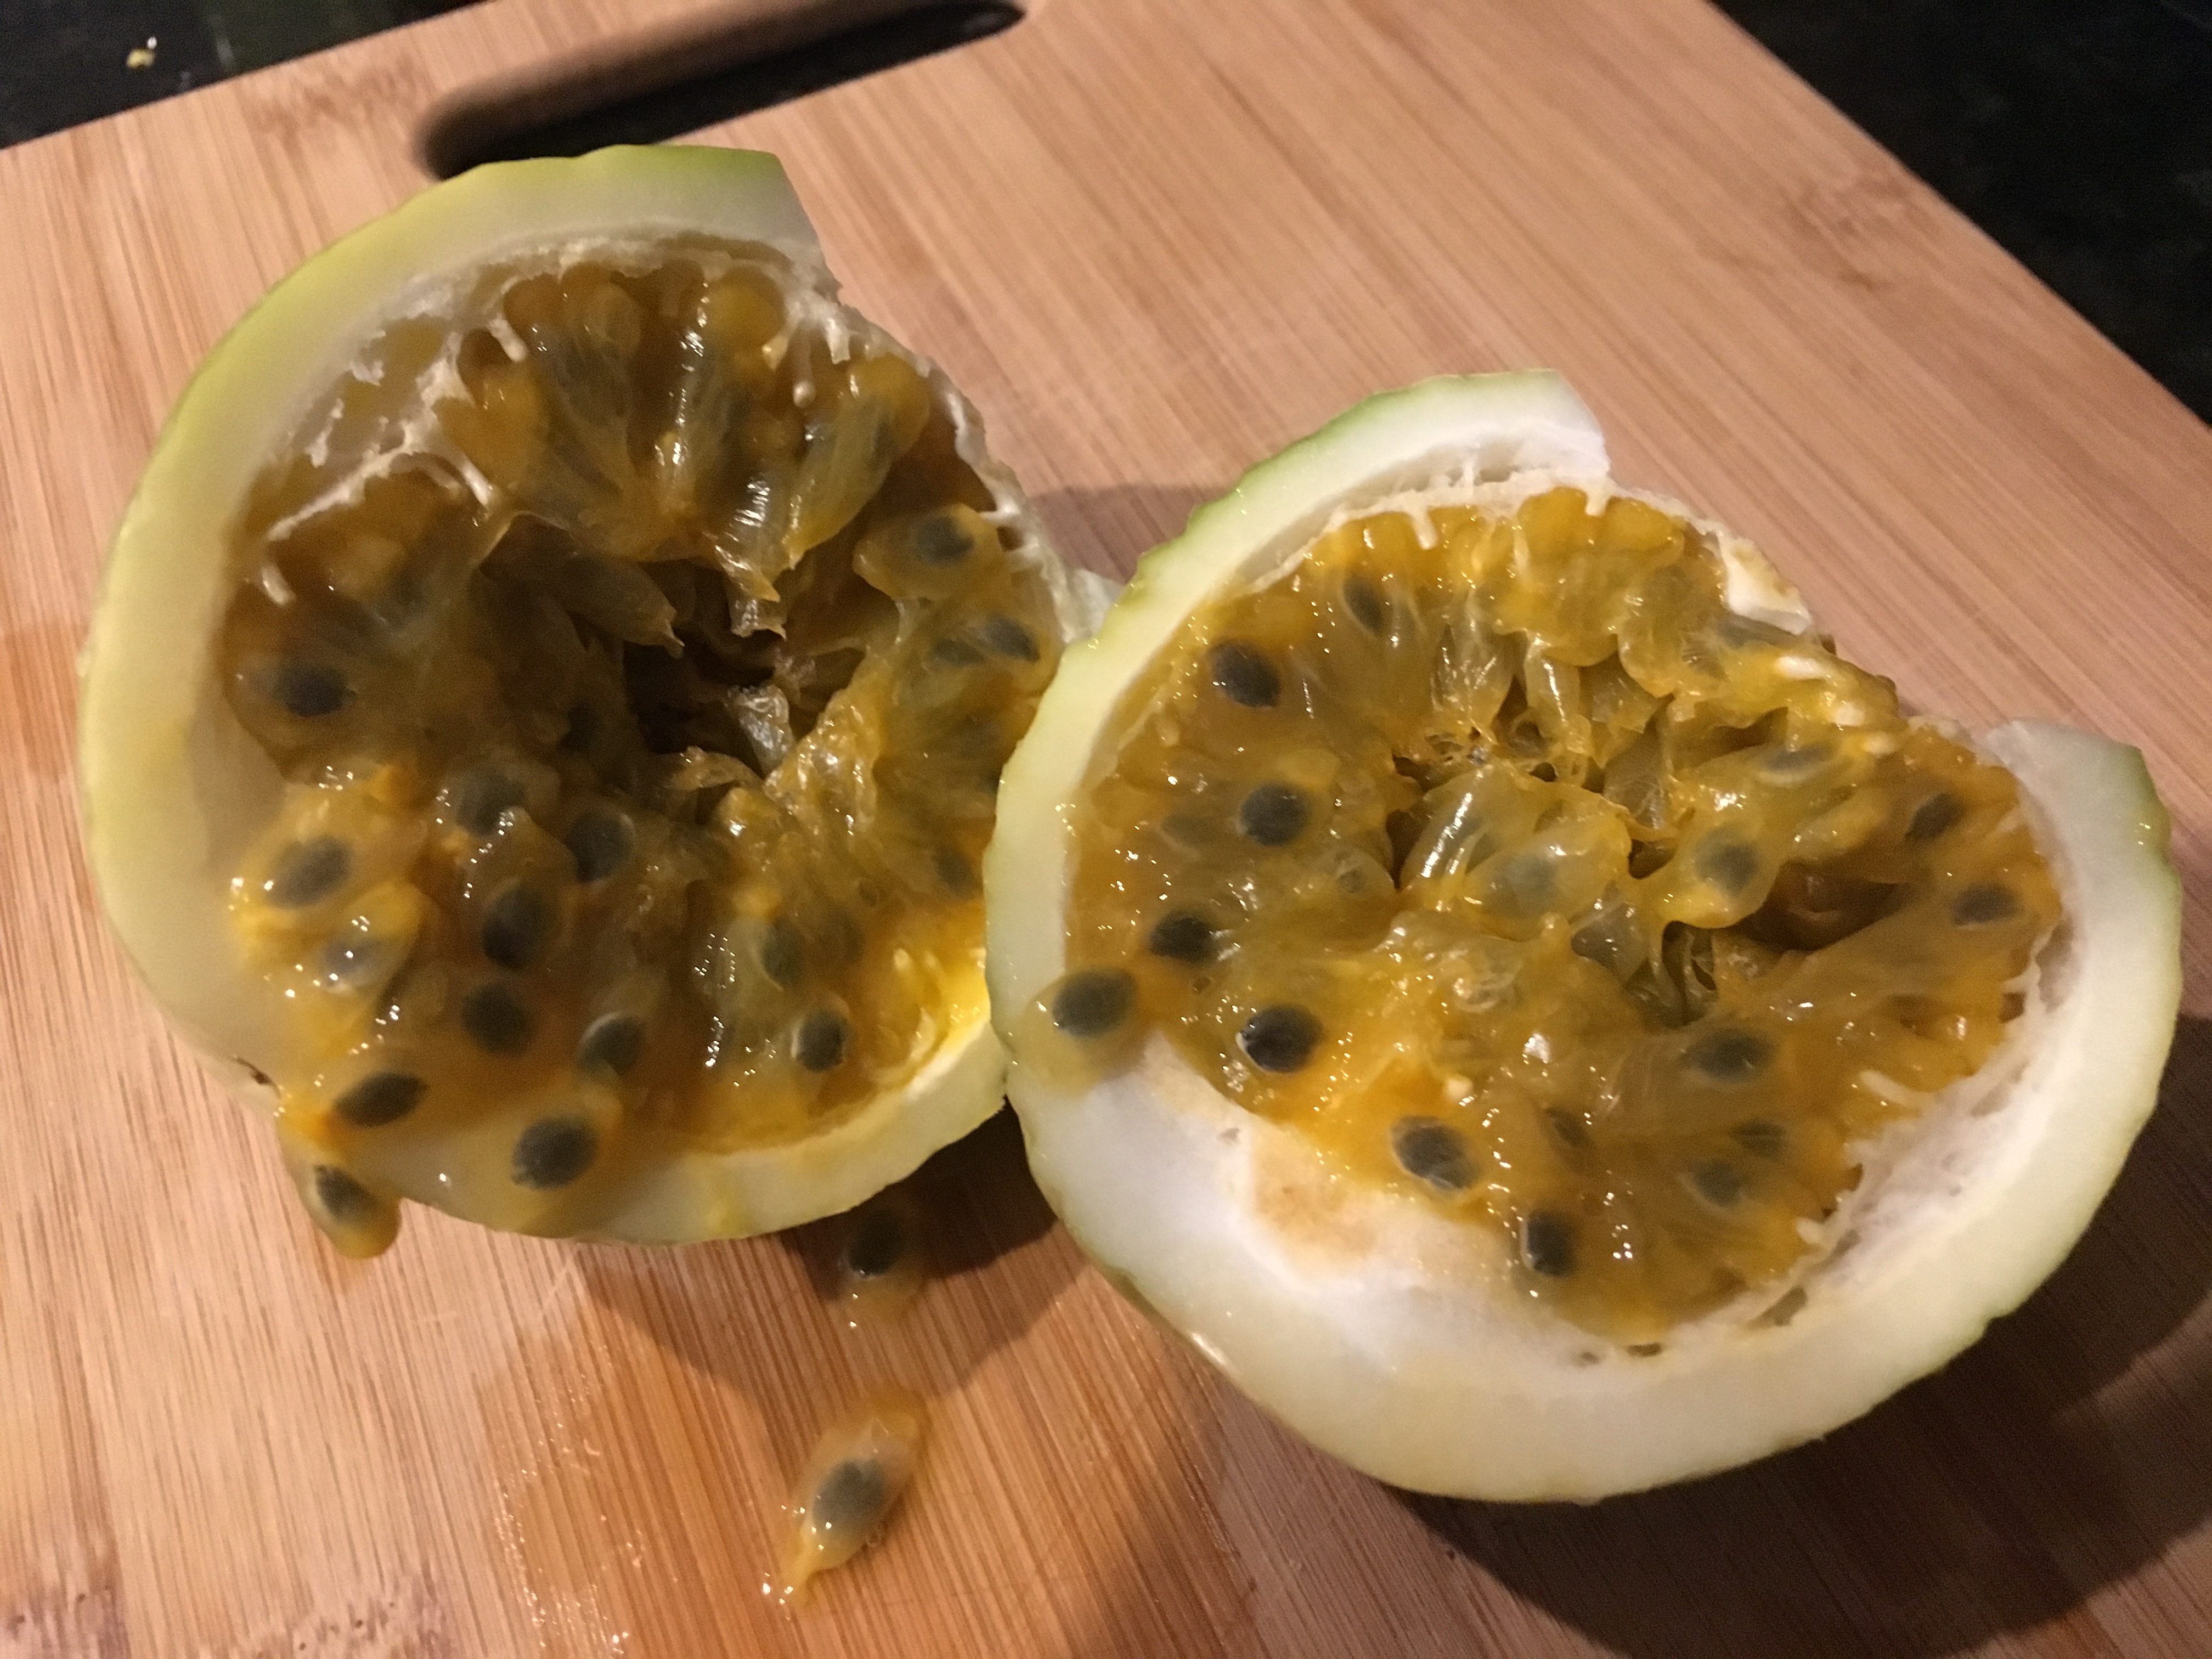 Passion Fruit Innards (hmm, maybe a good band name?)